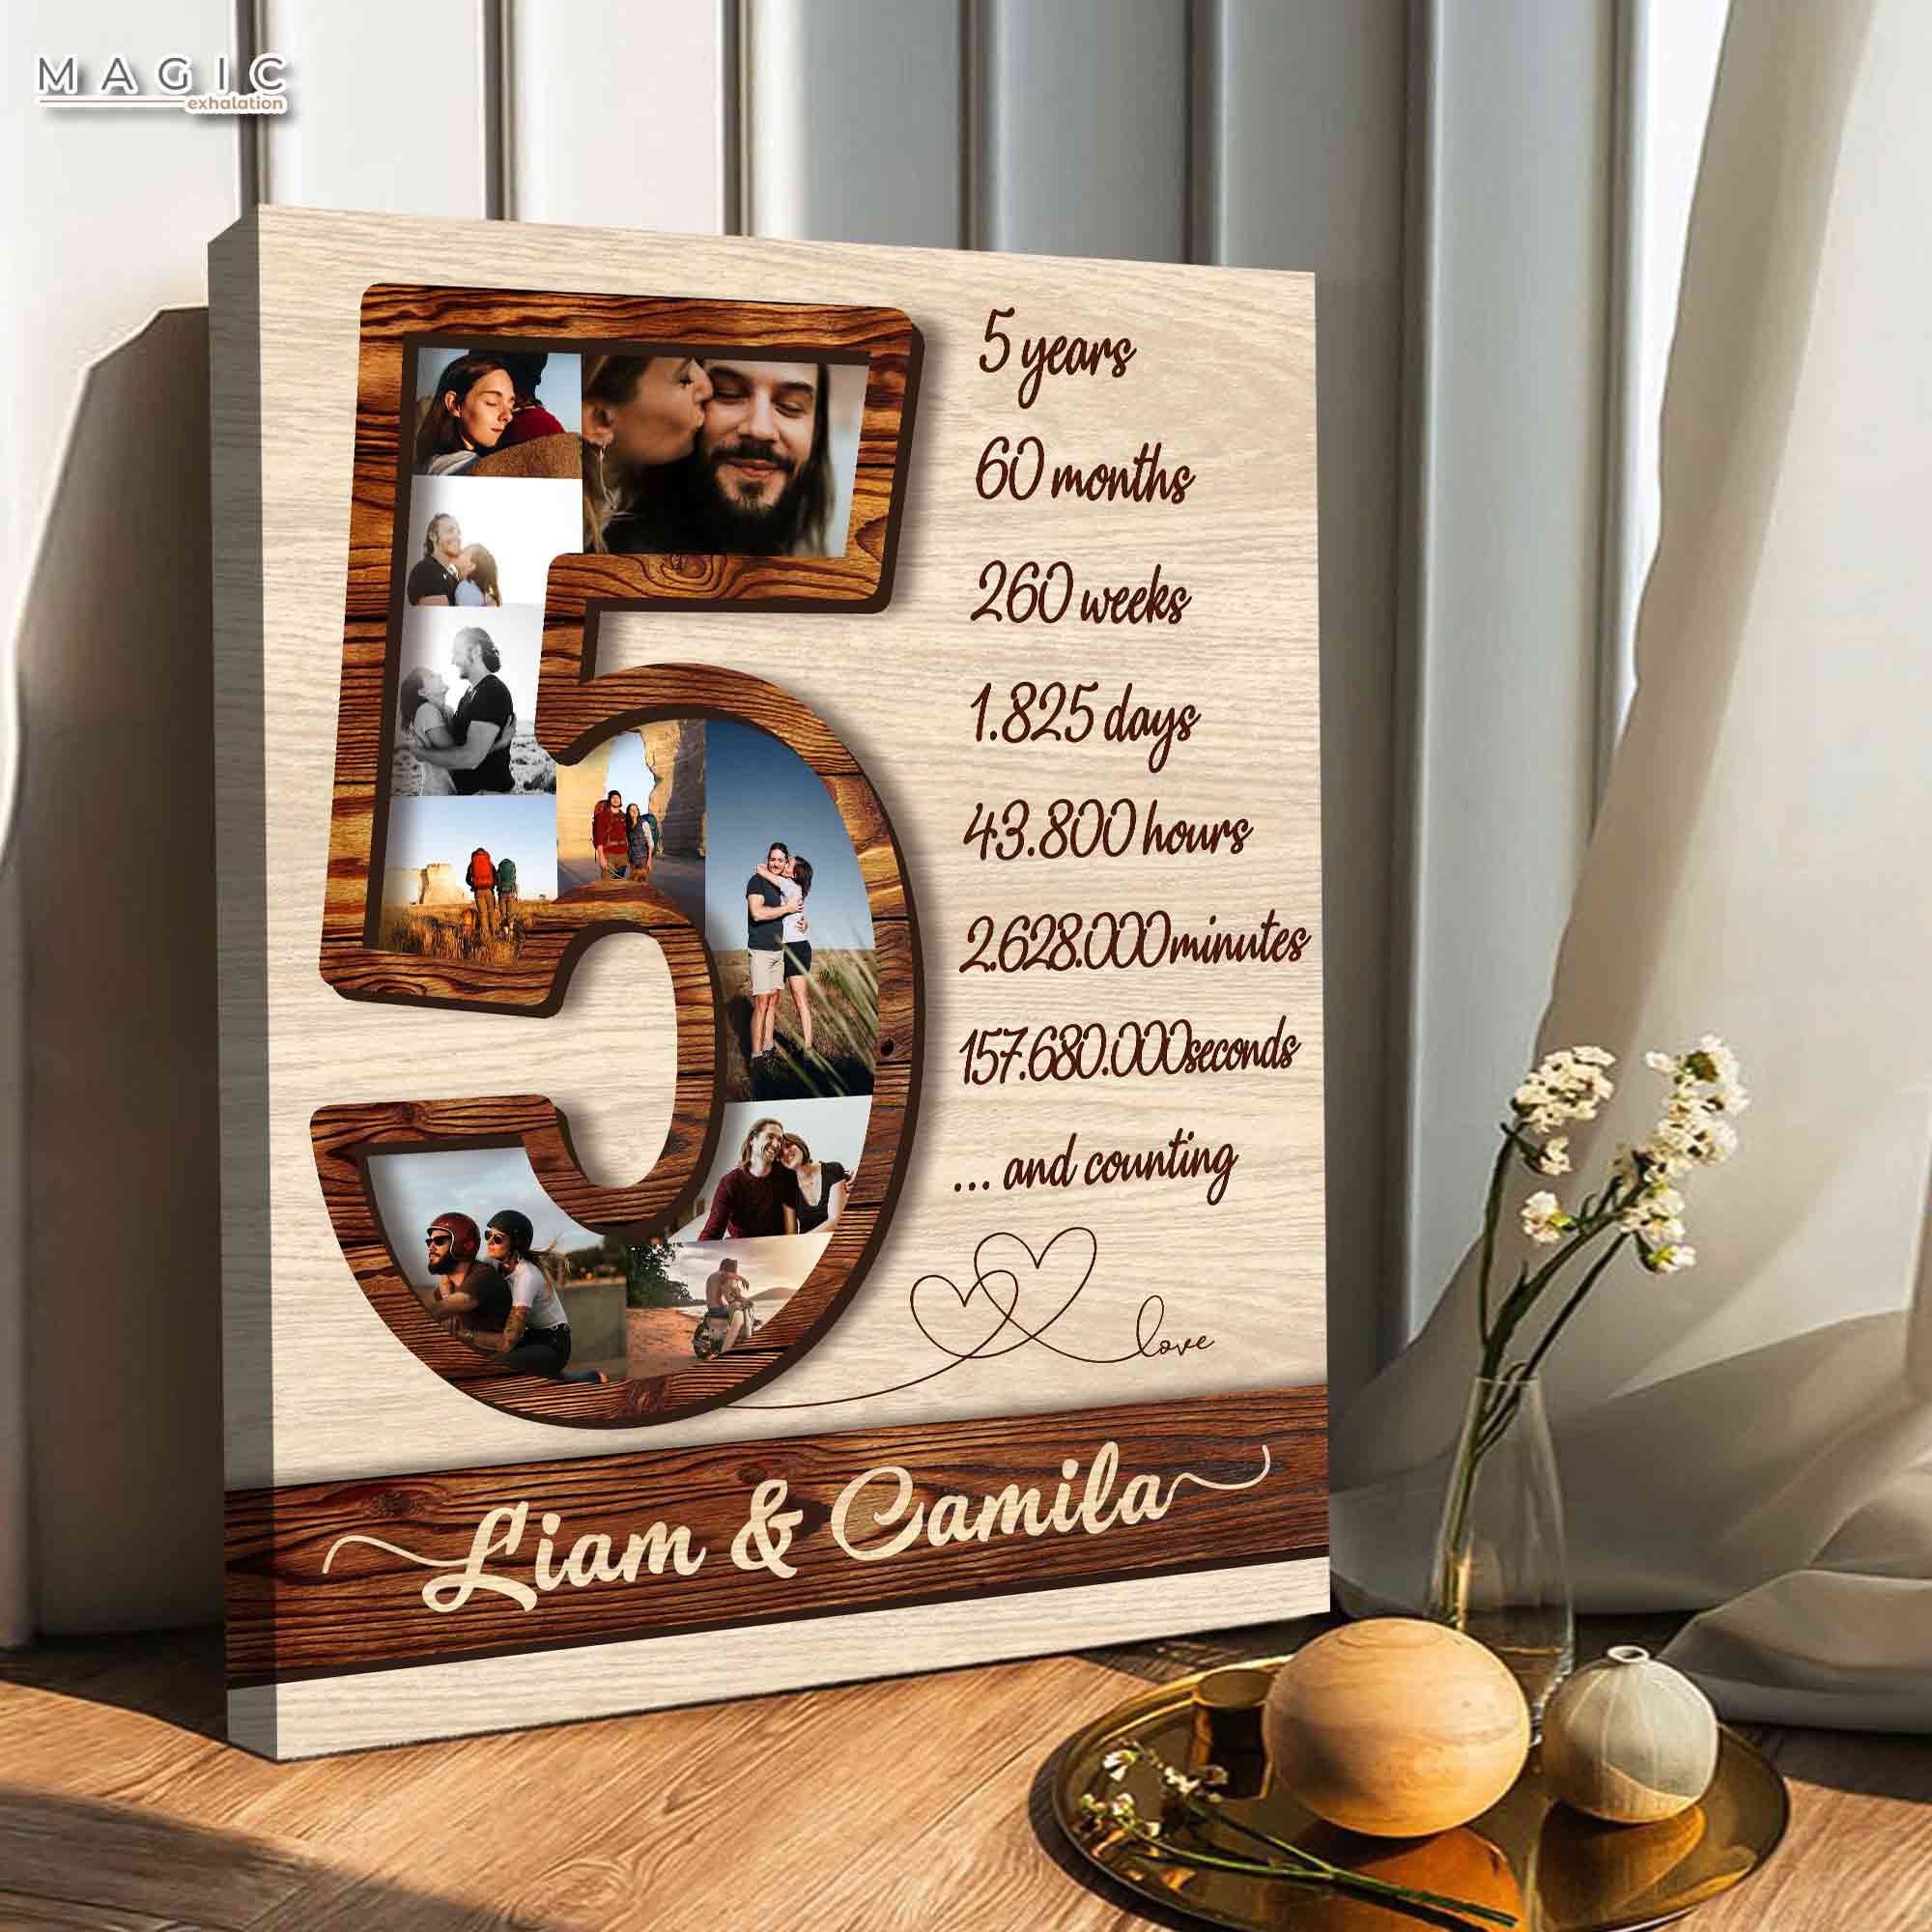 5 year anniversary gift for husband, gifts for wooden anniversary